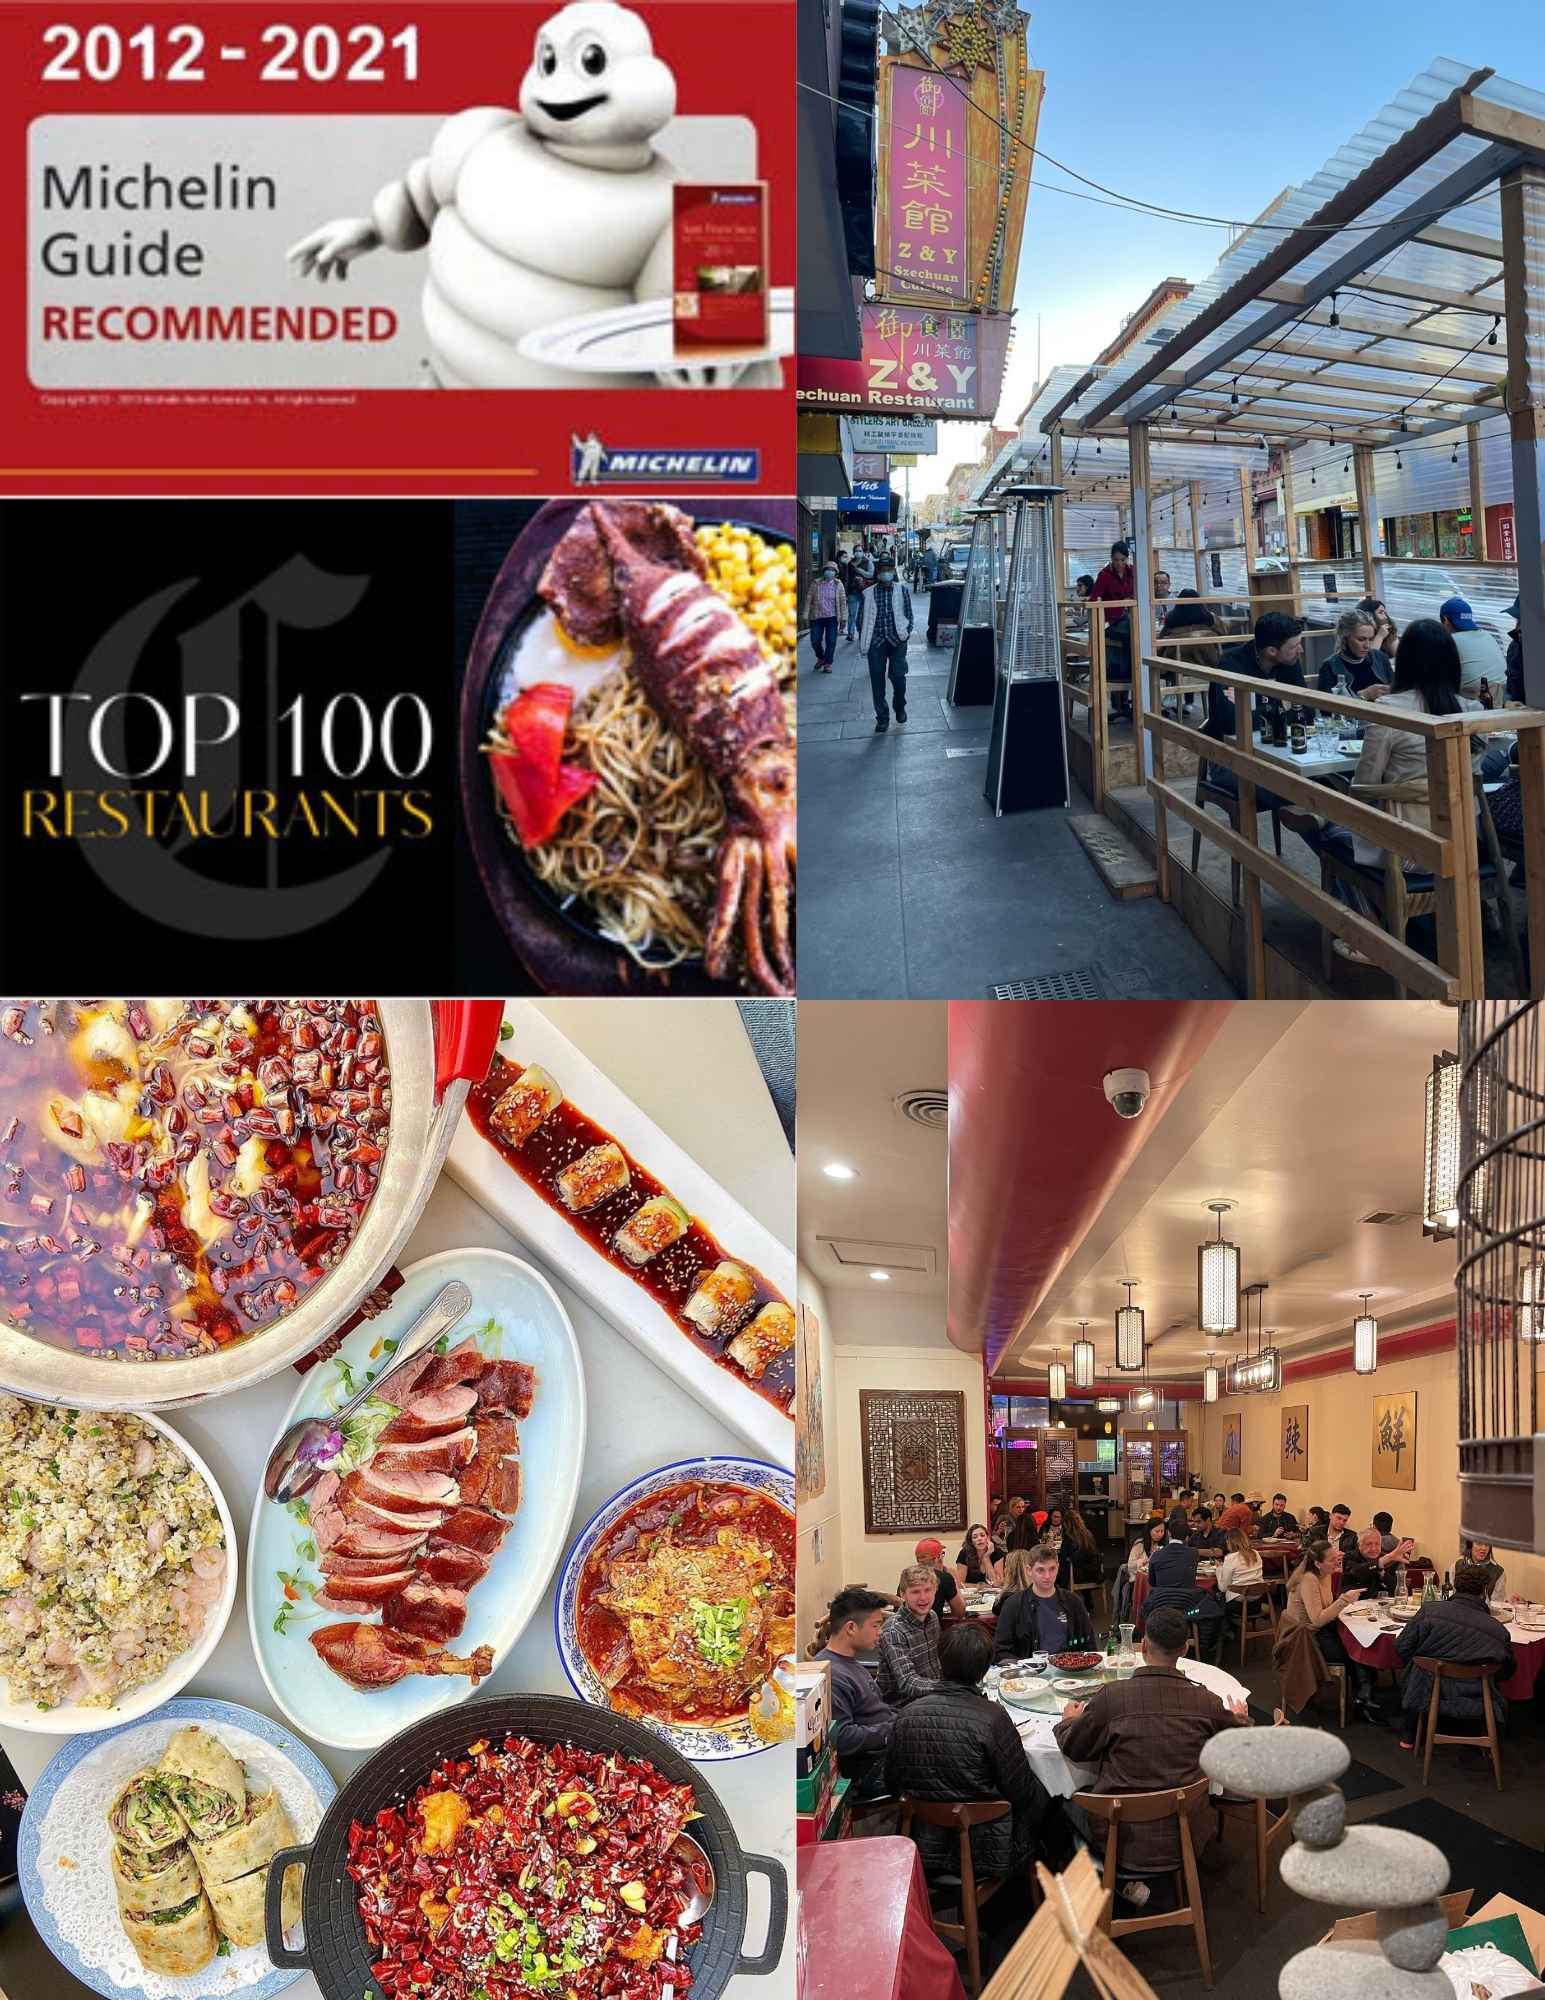 Michelin Guide Recommended Award, Indoor - Outdoor Dining, Traditional Szechuan Cuisine - Z & Y Restaurant